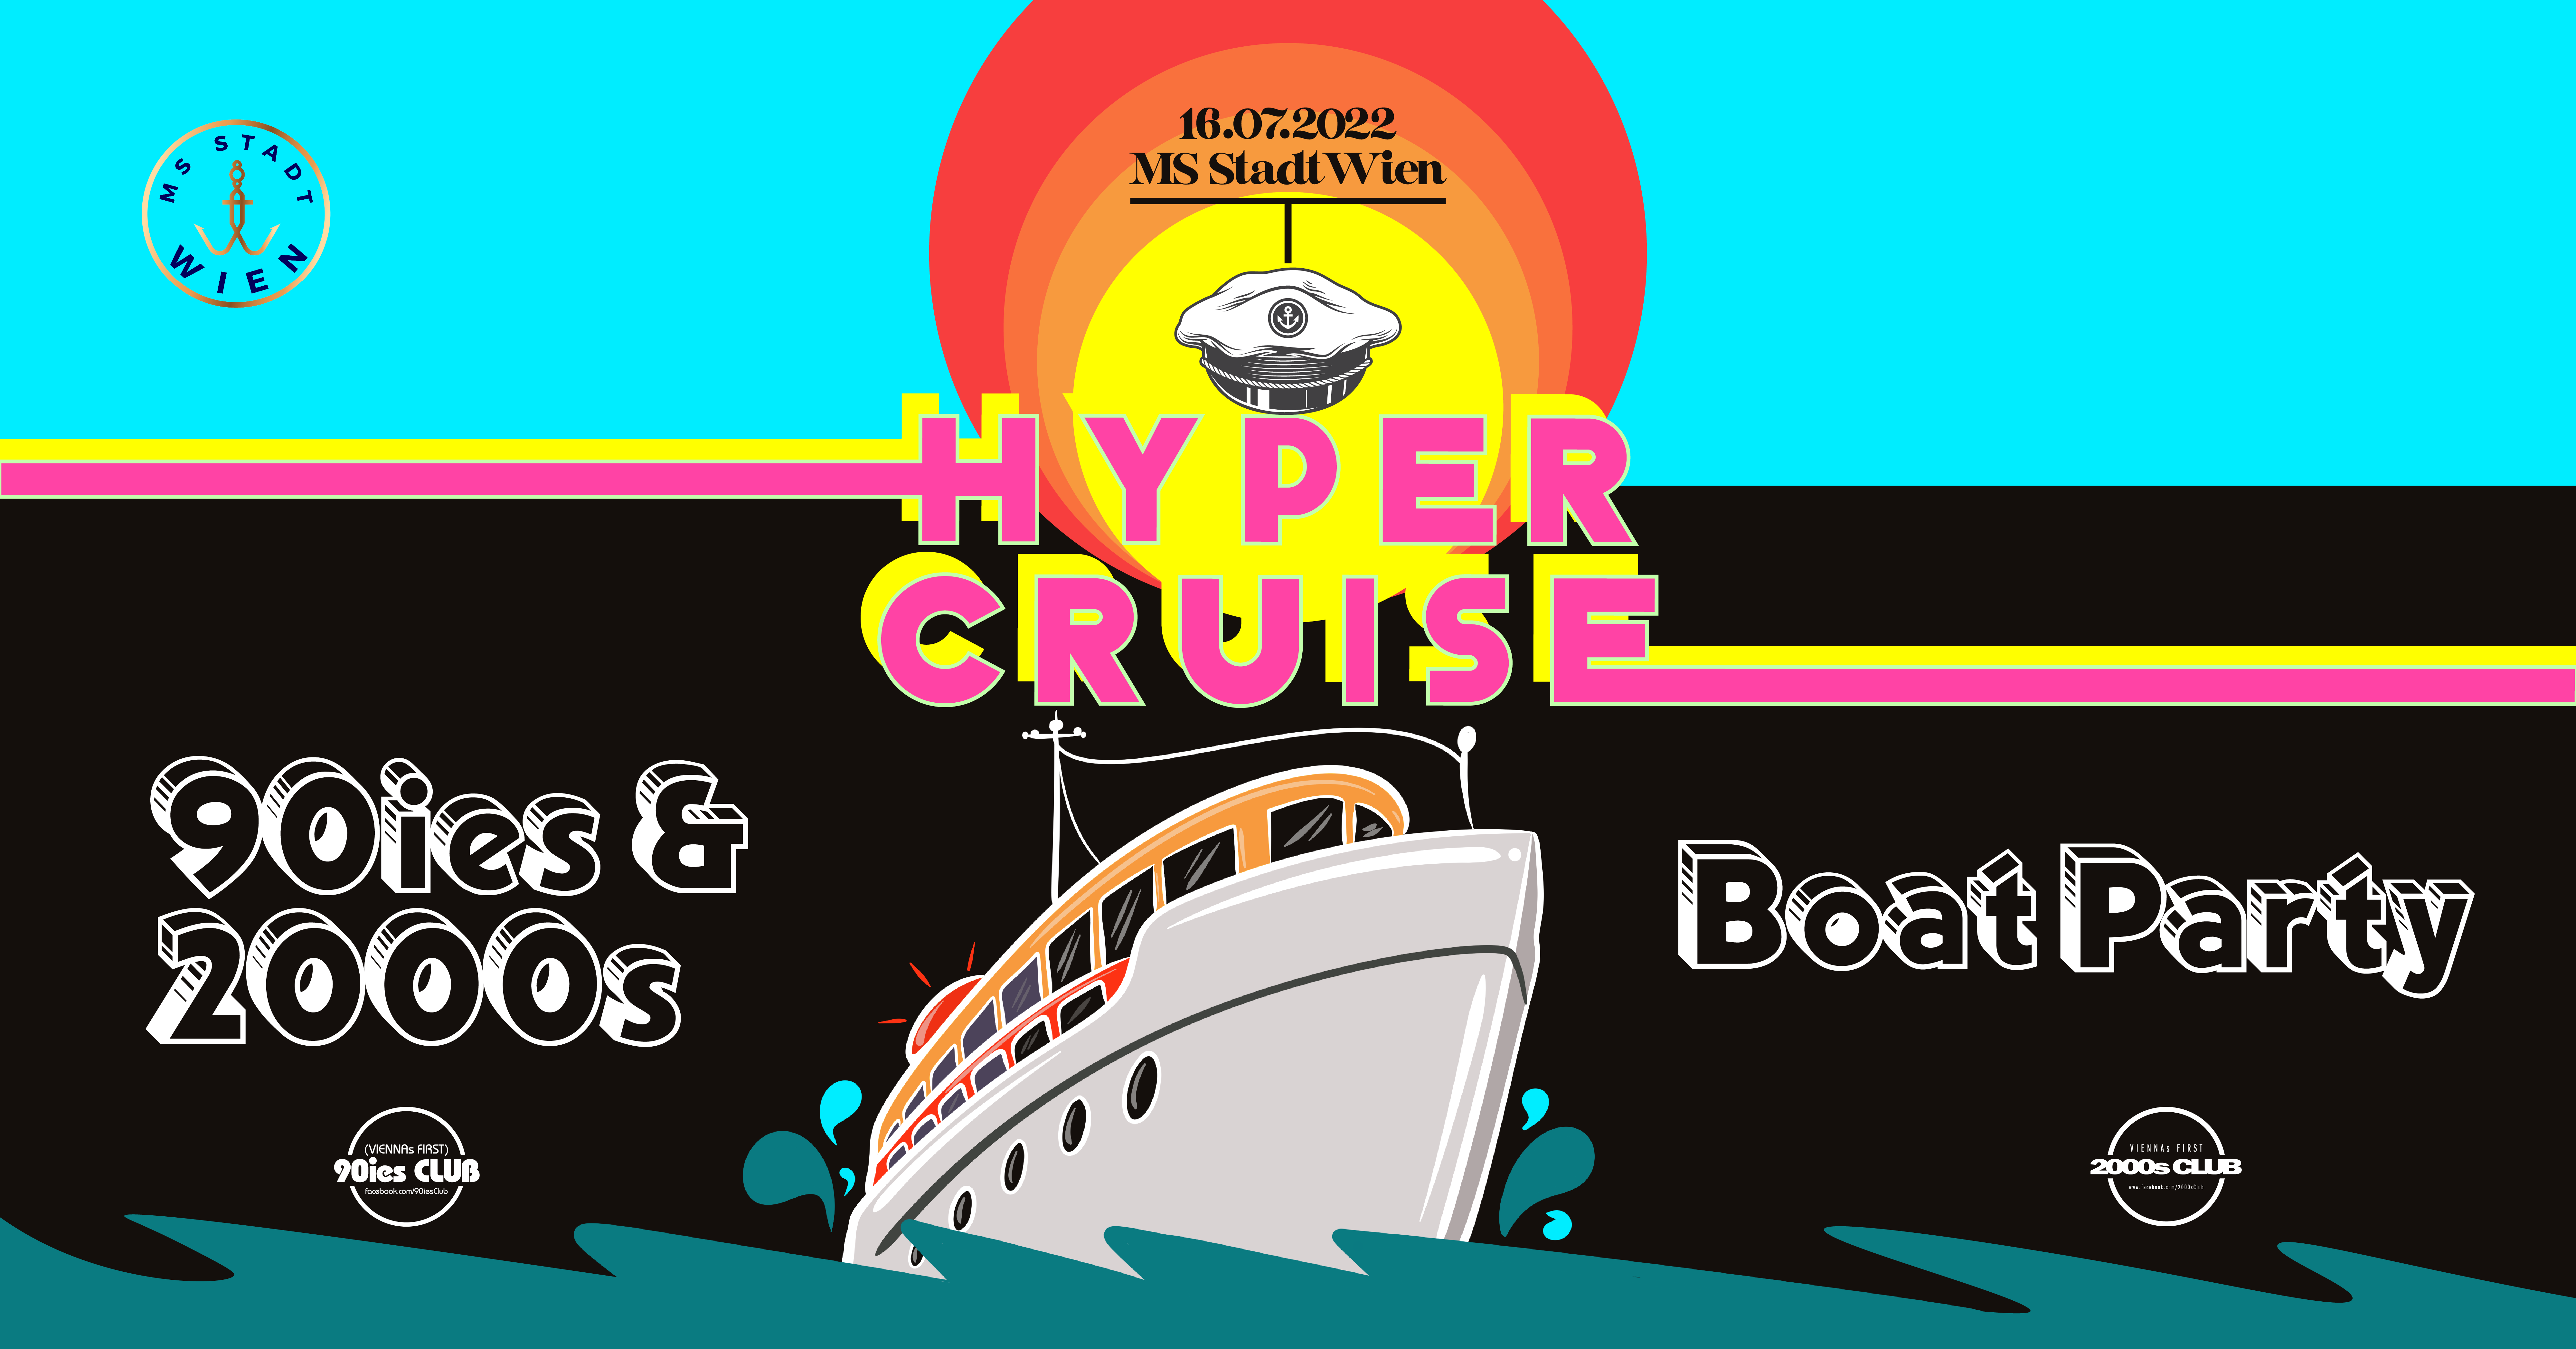 Hyper Cruise - 90ies & 2000s Boat Party - Página frontal